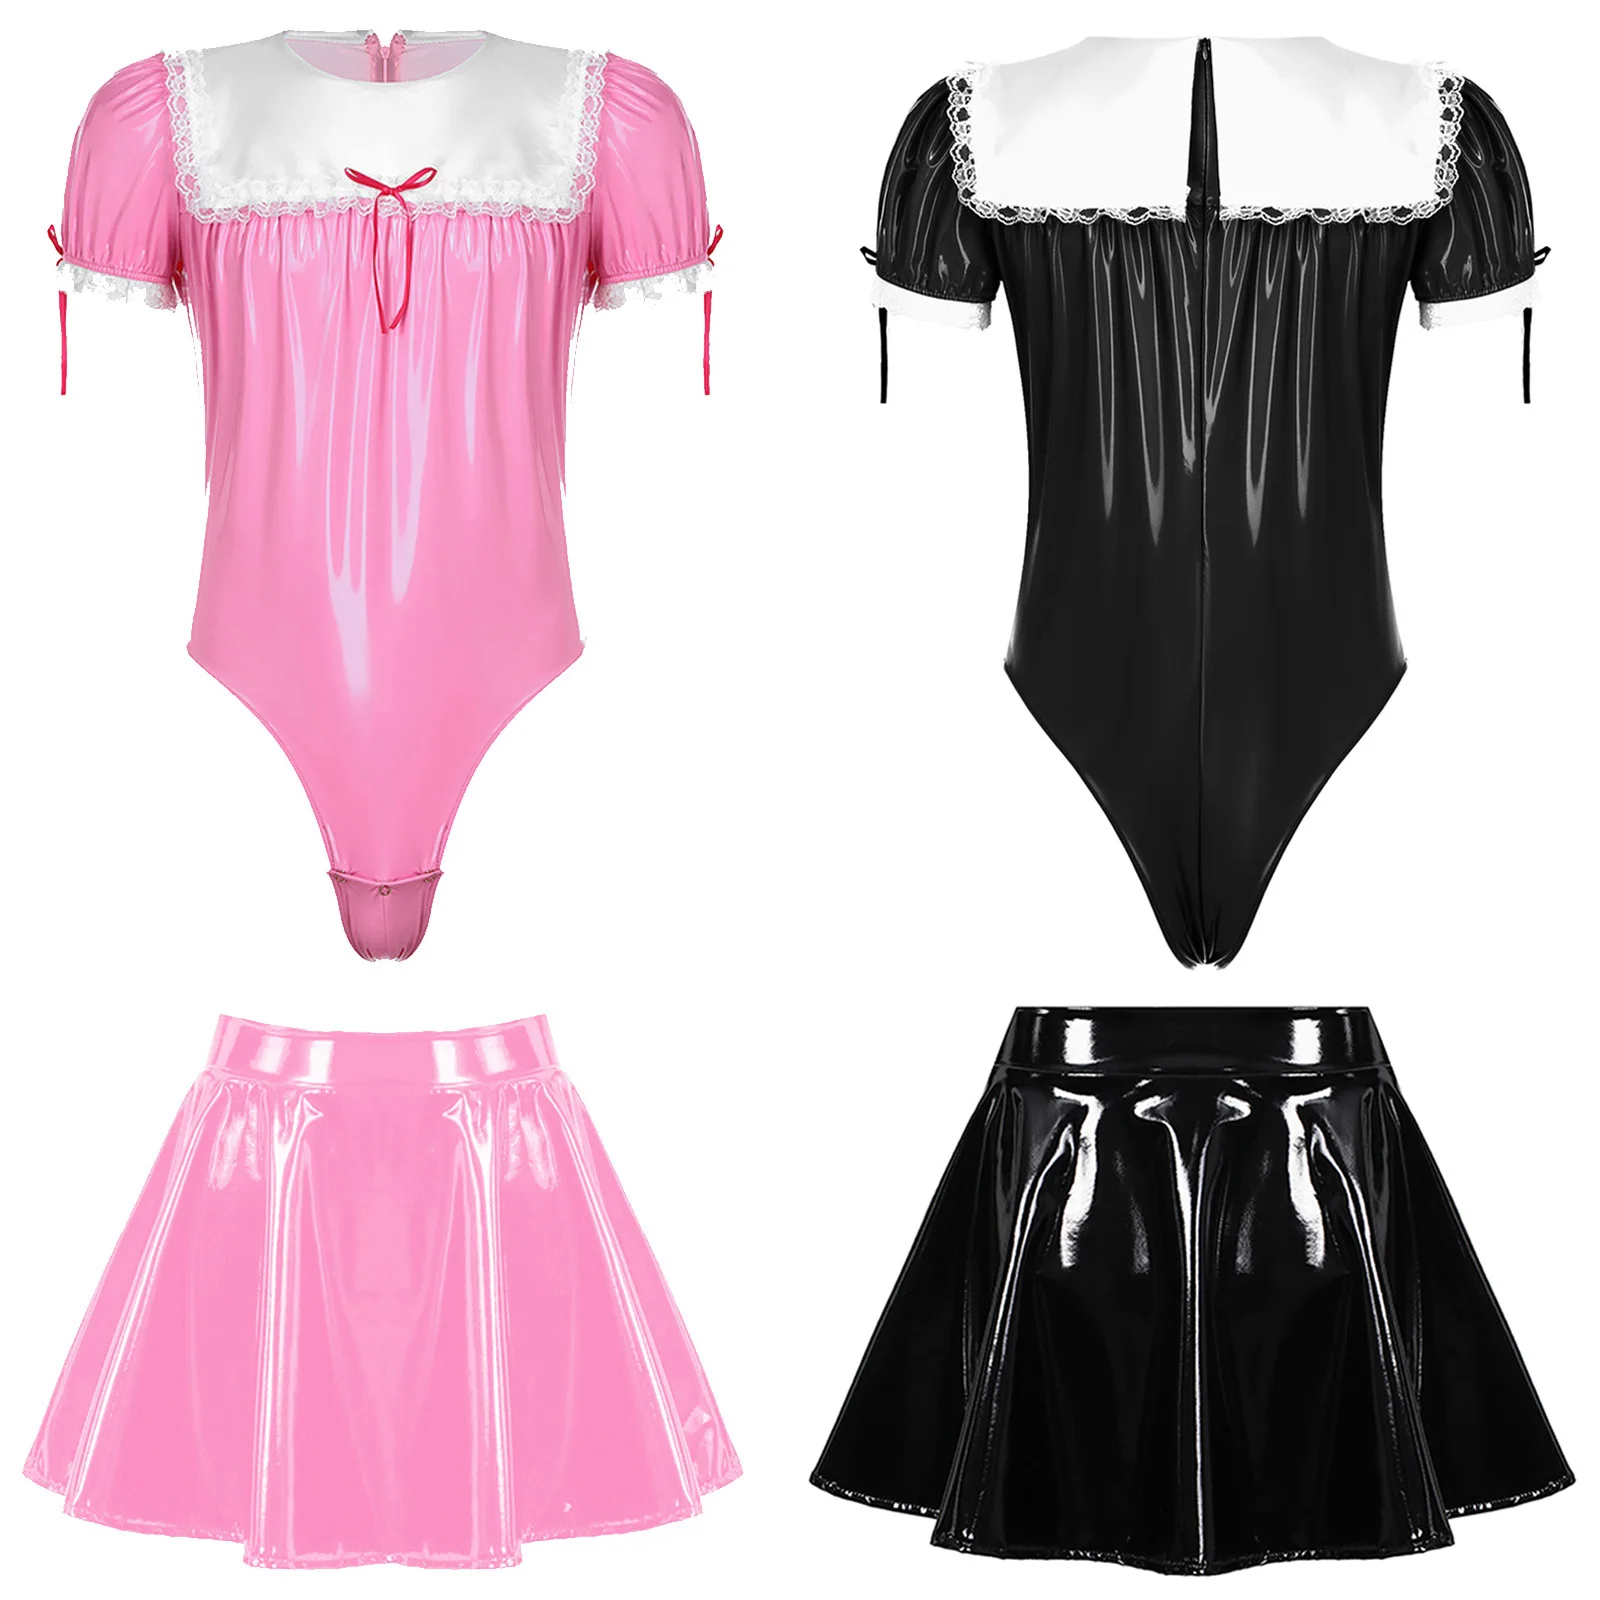 Men's Sissy Exotic Sets Wet Look PVC Leather French Maid Cosplay Costume Lace Trimed Leotard Bodysuit with A-line Skirt Roleplay